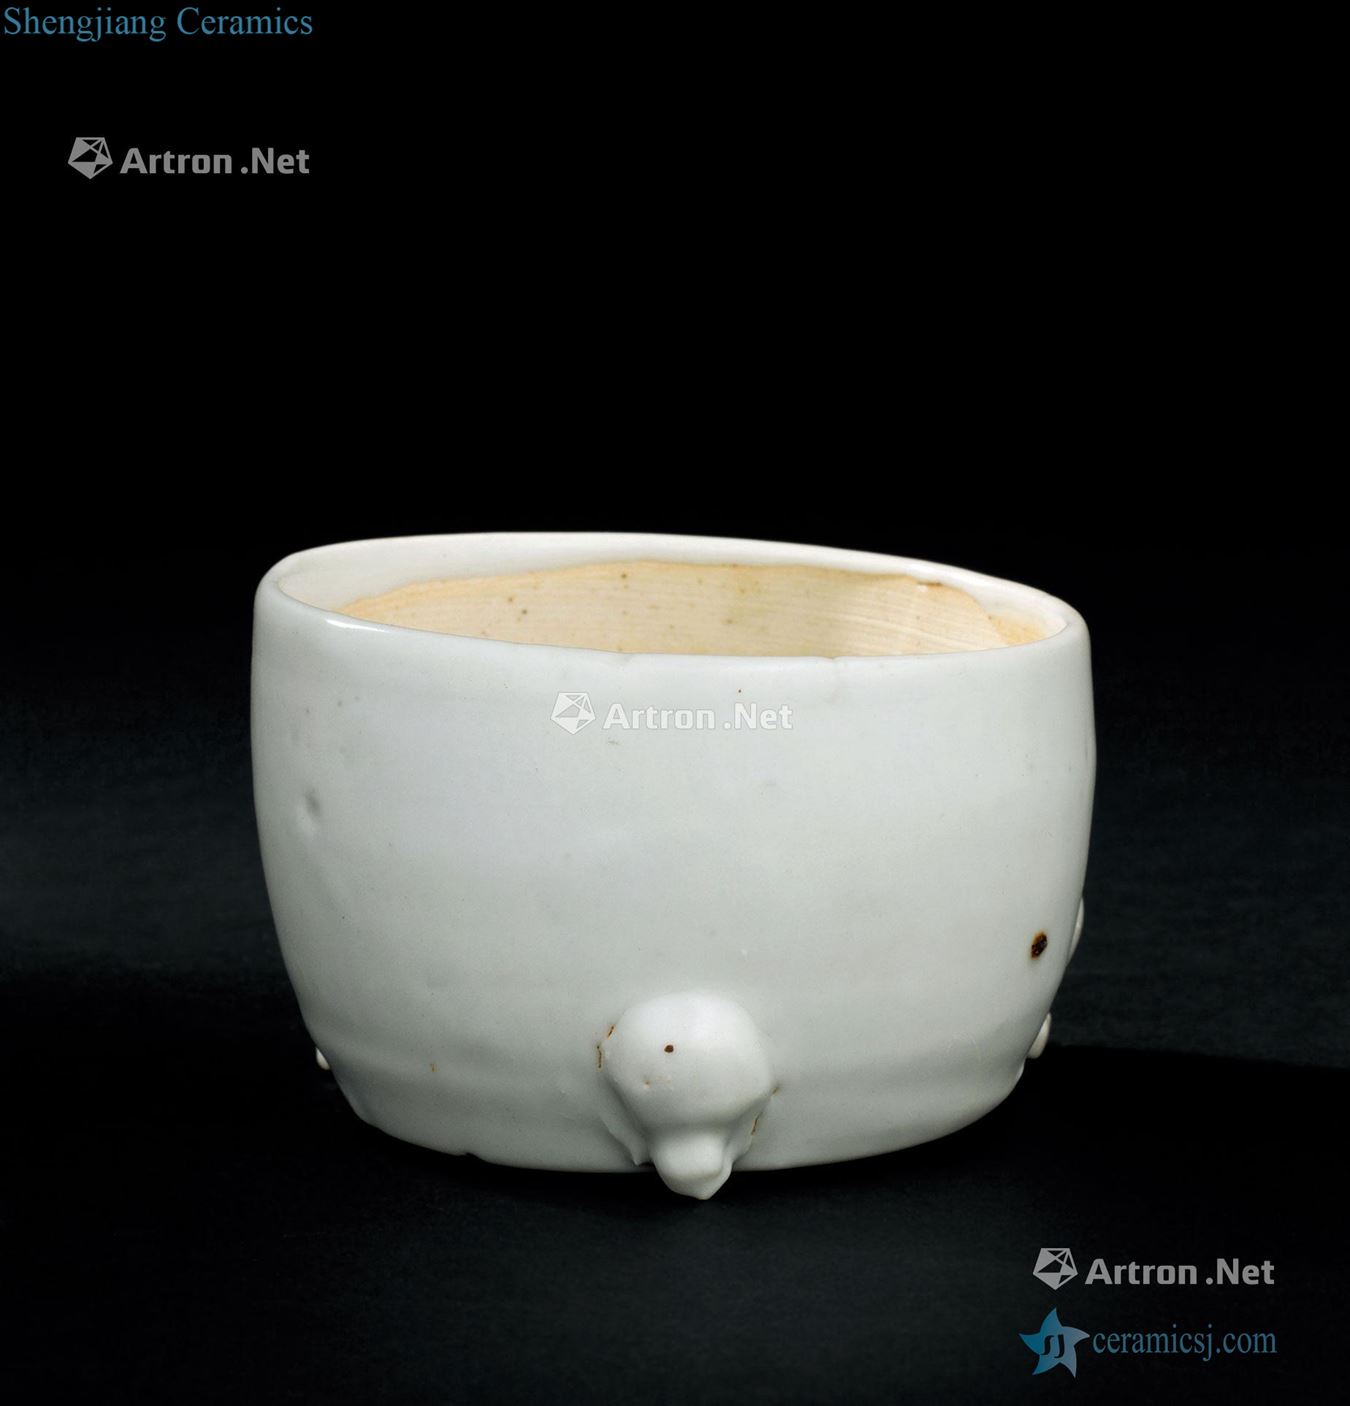 The yuan dynasty (1271-1368), white porcelain incense burner with three legs